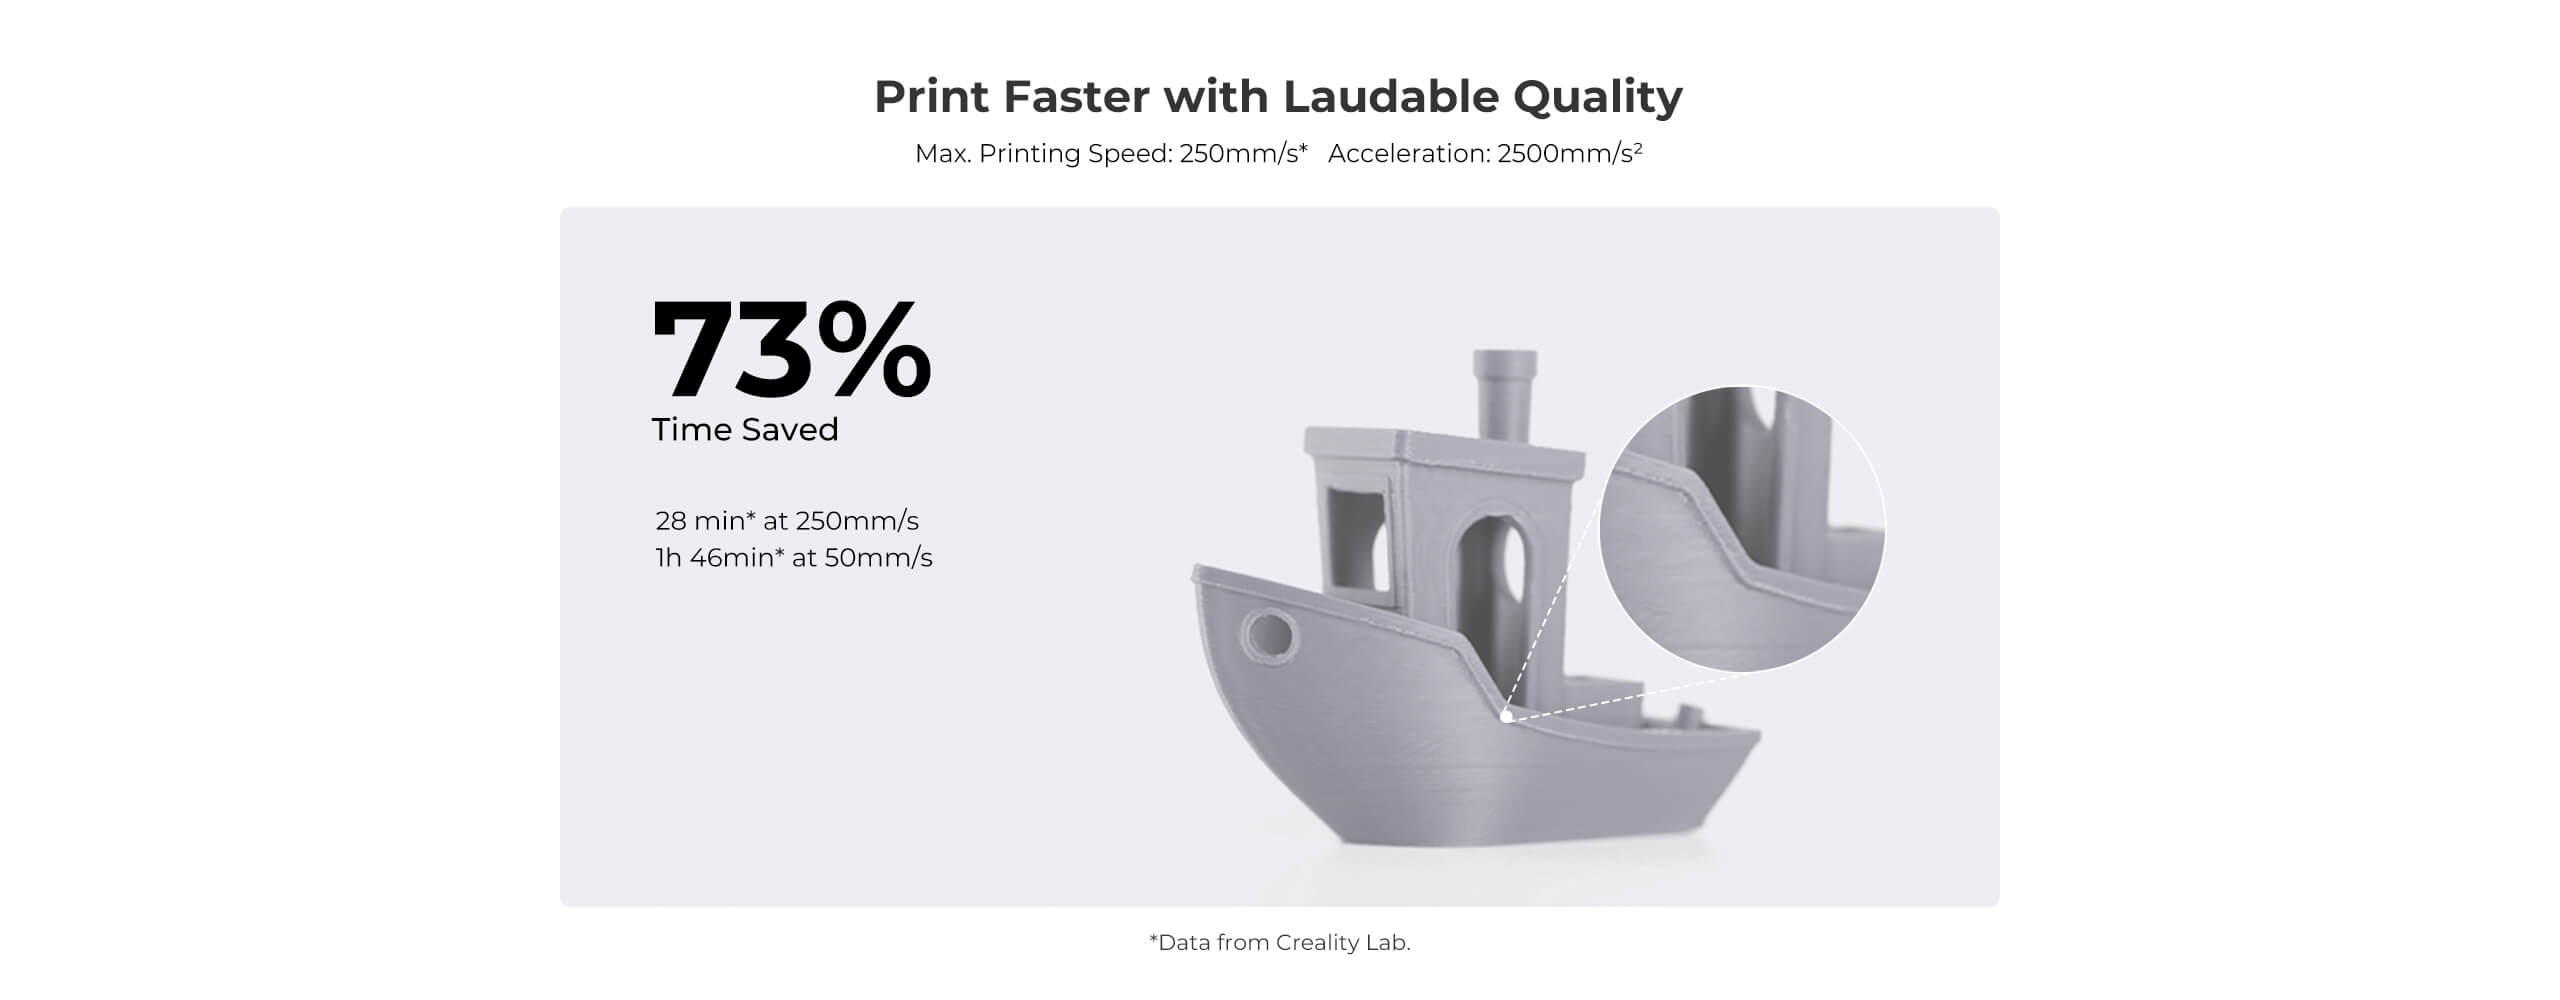 Ender 3 V3 SE priting speed, max. printing speed: 250mm/s. acceleration: 2500 mm/s